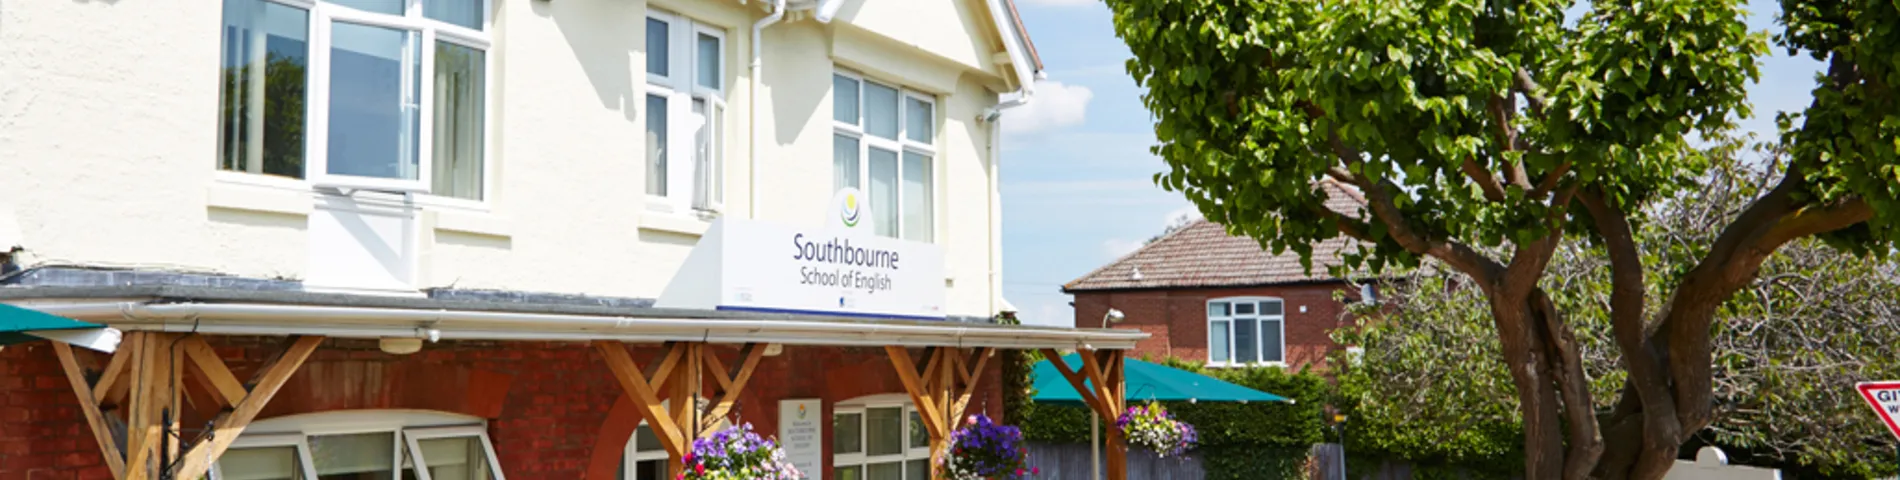 Southbourne School of English photo 1